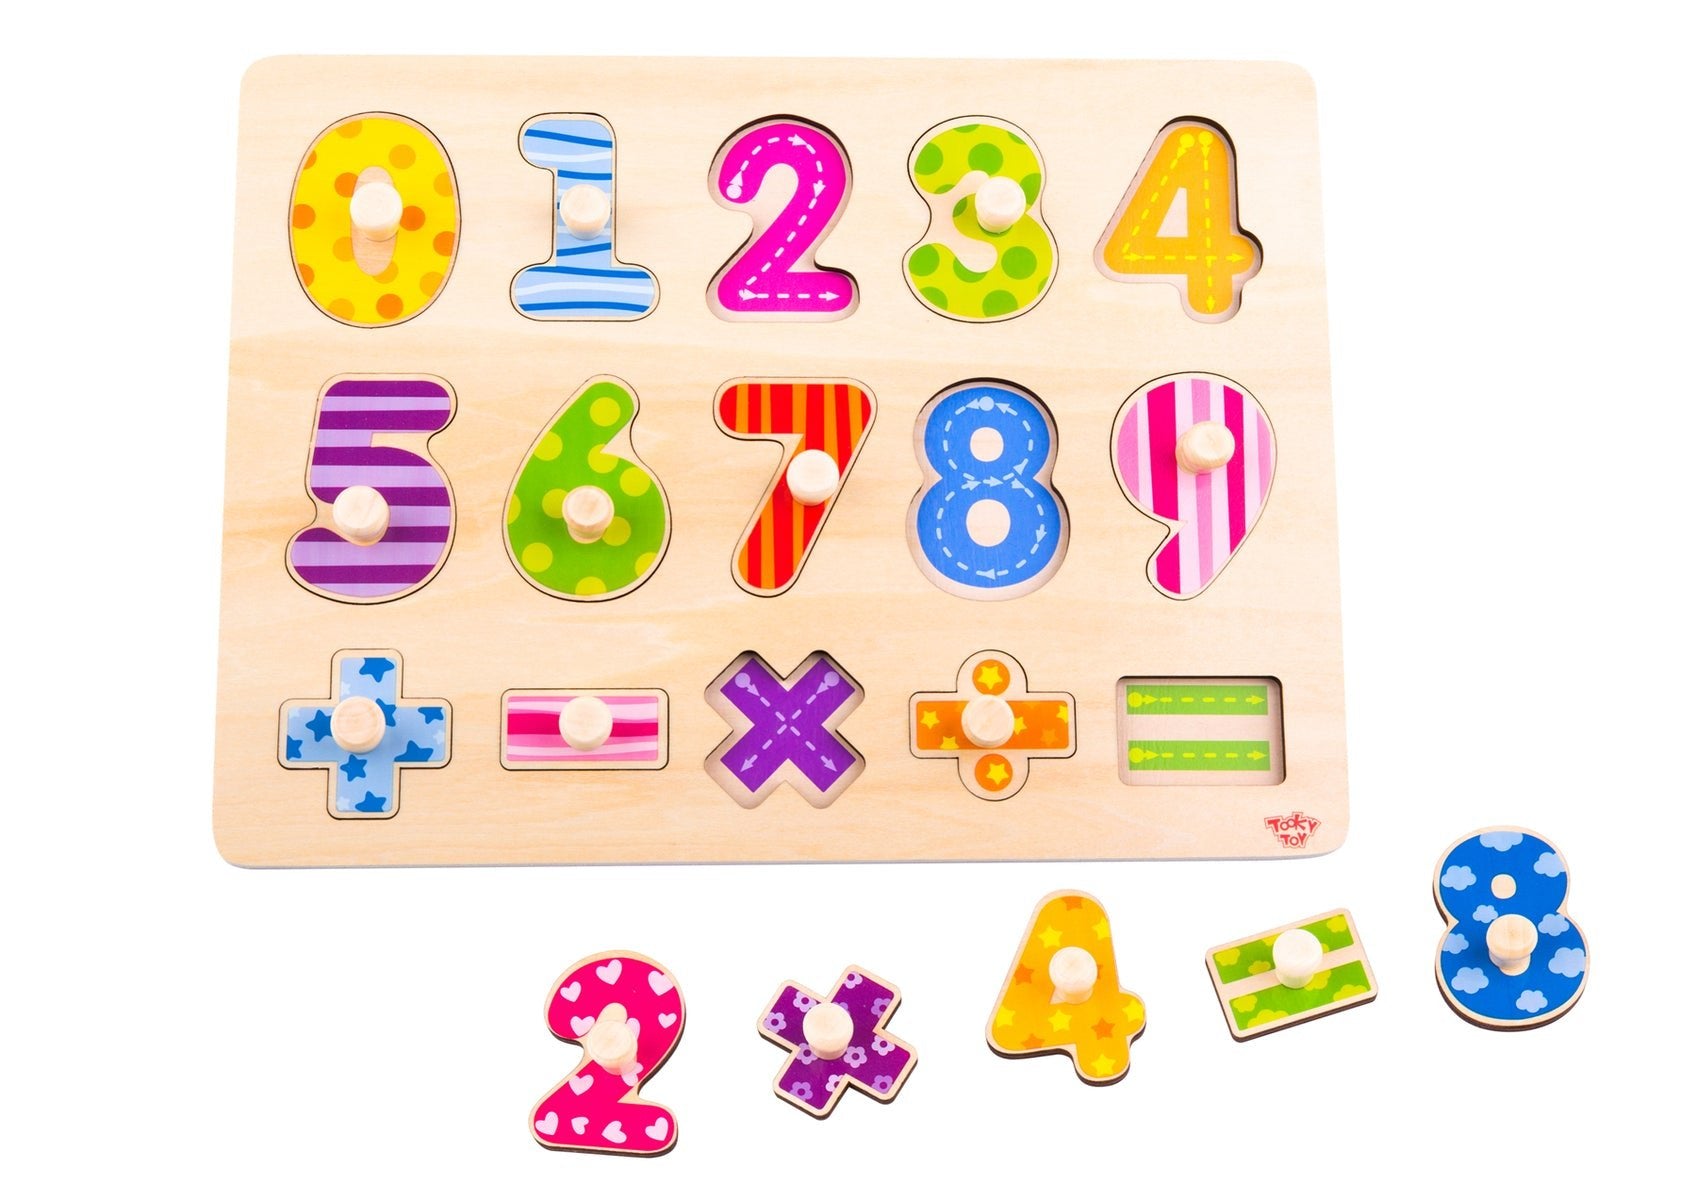 Tooky Toy Wooden Numbers Maths Peg Puzzle- Develop counting & visual perception skills with 16 painted wooden pieces and knobs